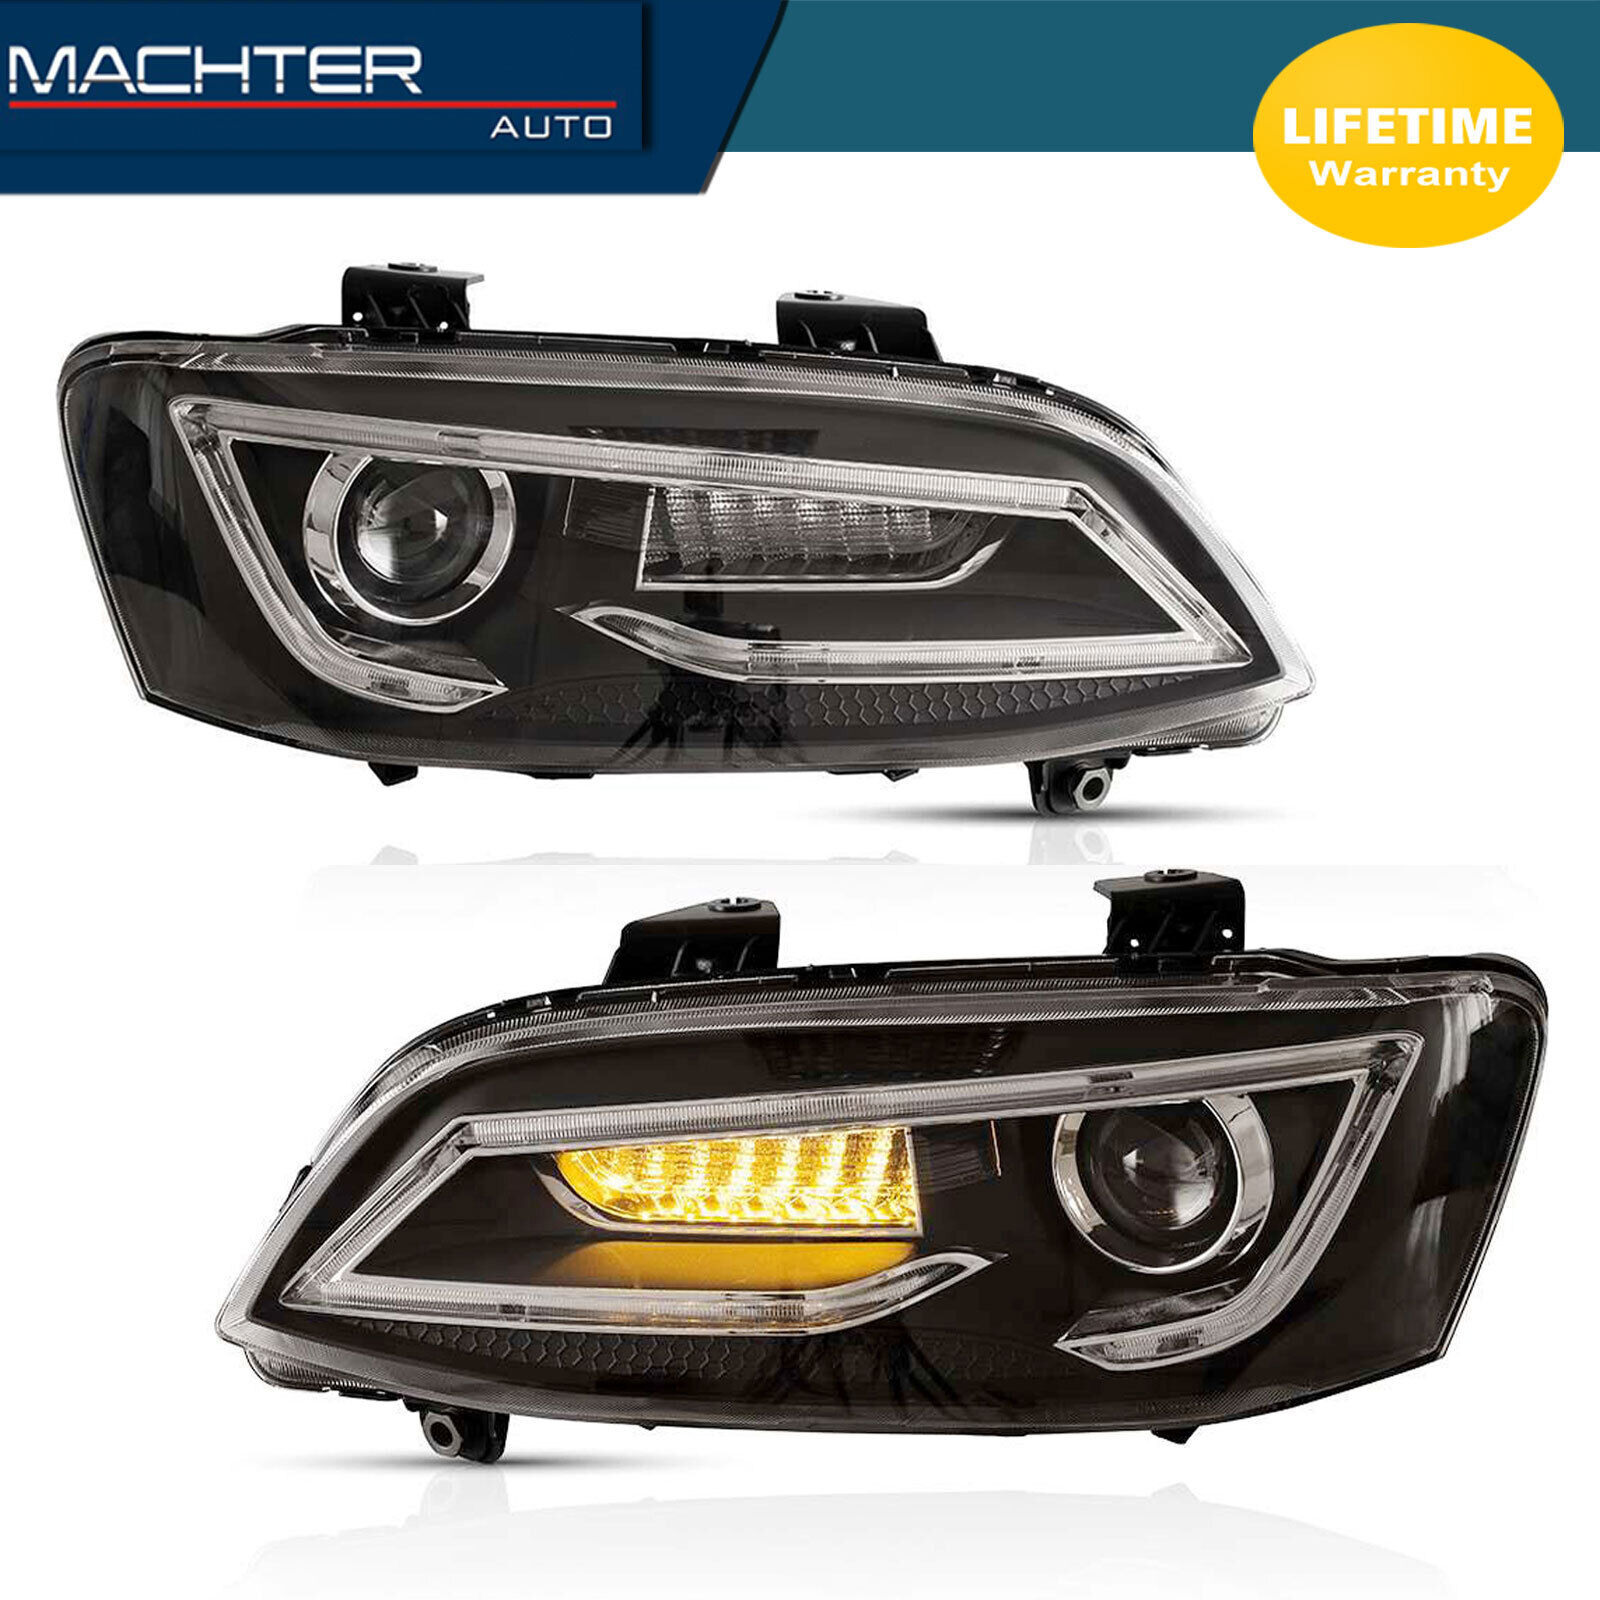 Machter (2) LED Headlights Fit For Pontiac G8 GT GXP Holden Commodore VE I II